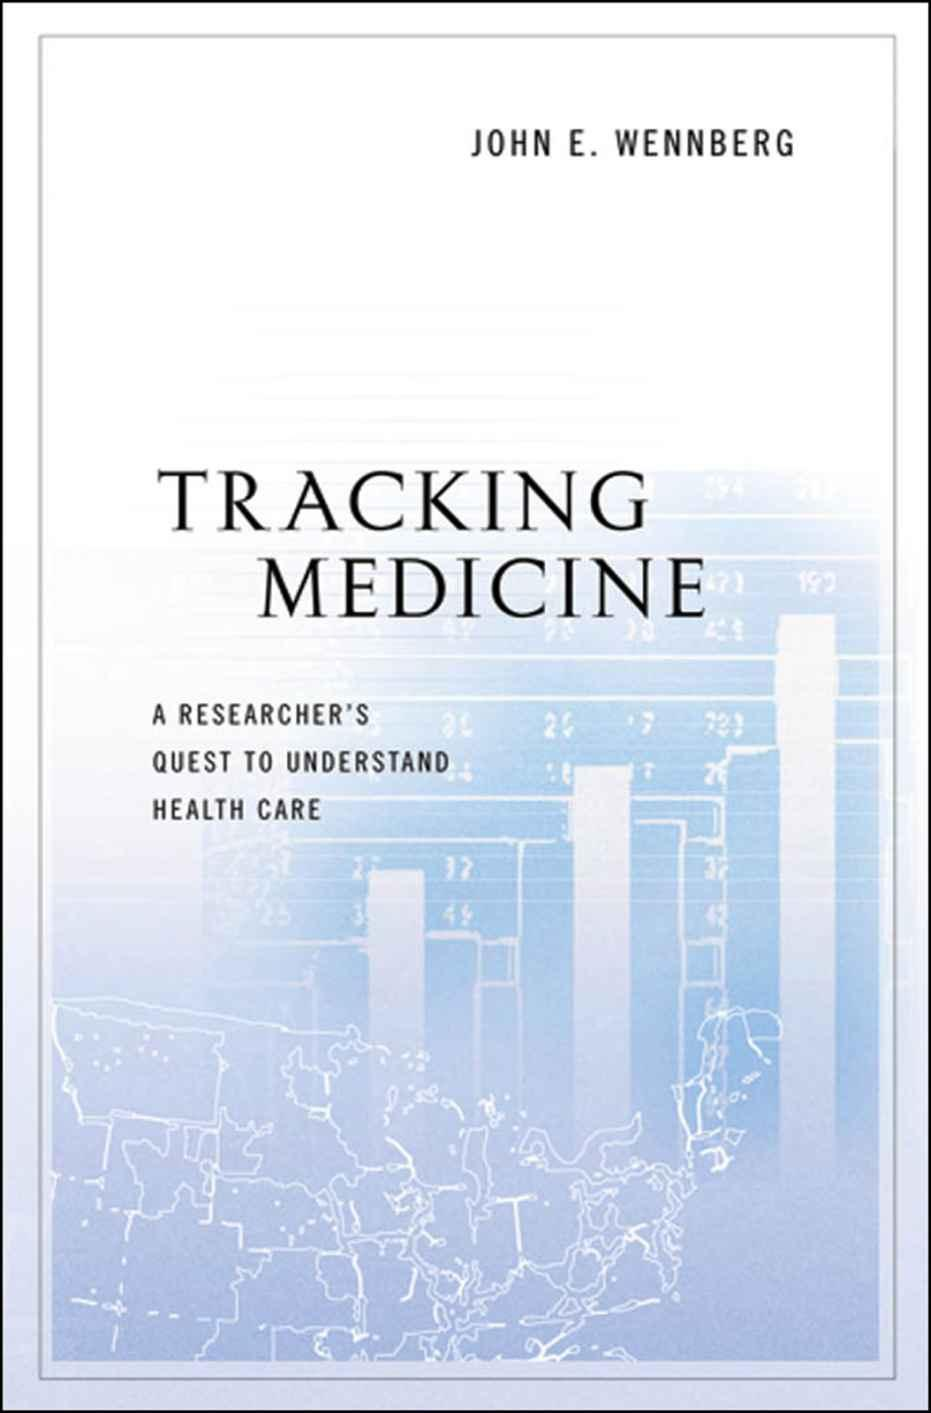 Written by a groundbreaking figure of modern medical study, Tracking Medicine is an eye-opening introduction to the science of health care delivery, as well as a powerful argument for its relevance